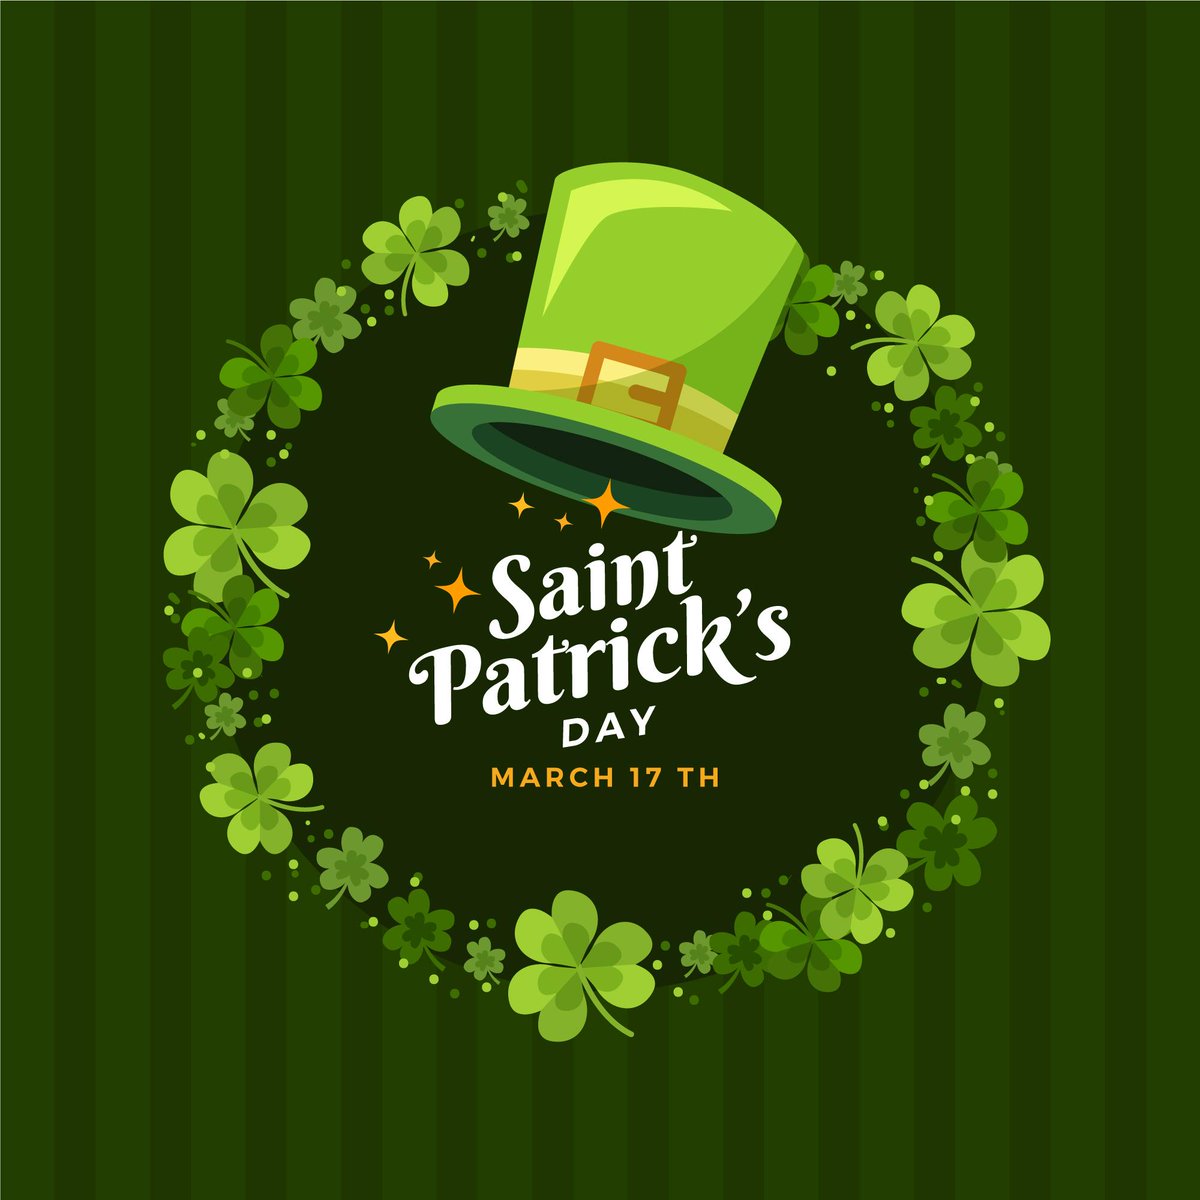 🍀Saint Patricks Day Green Sale 🍀Save -25%
$29.99 / month on ActiveTrader Pro

🍀 Level up your trading with ActiveTrader Pro! Get 25% off during our Saint Patricks Day Green Sale and unlock an all-inclusive membership with:

🍀Real-time Stock Analysis & Guidance: Our team of